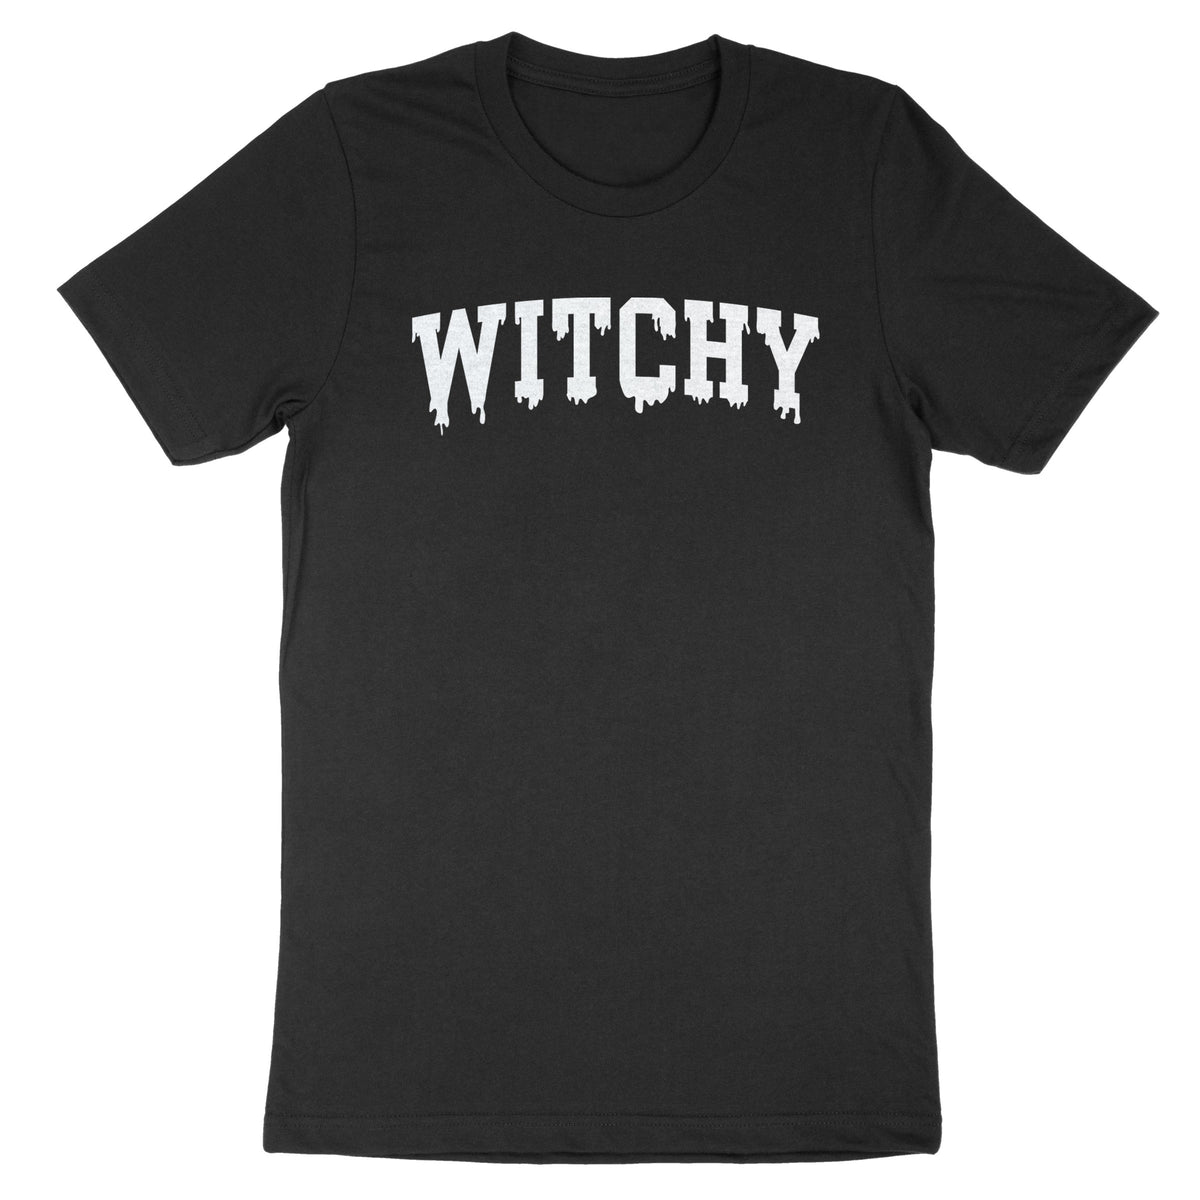 Witchy Collegiate Tee